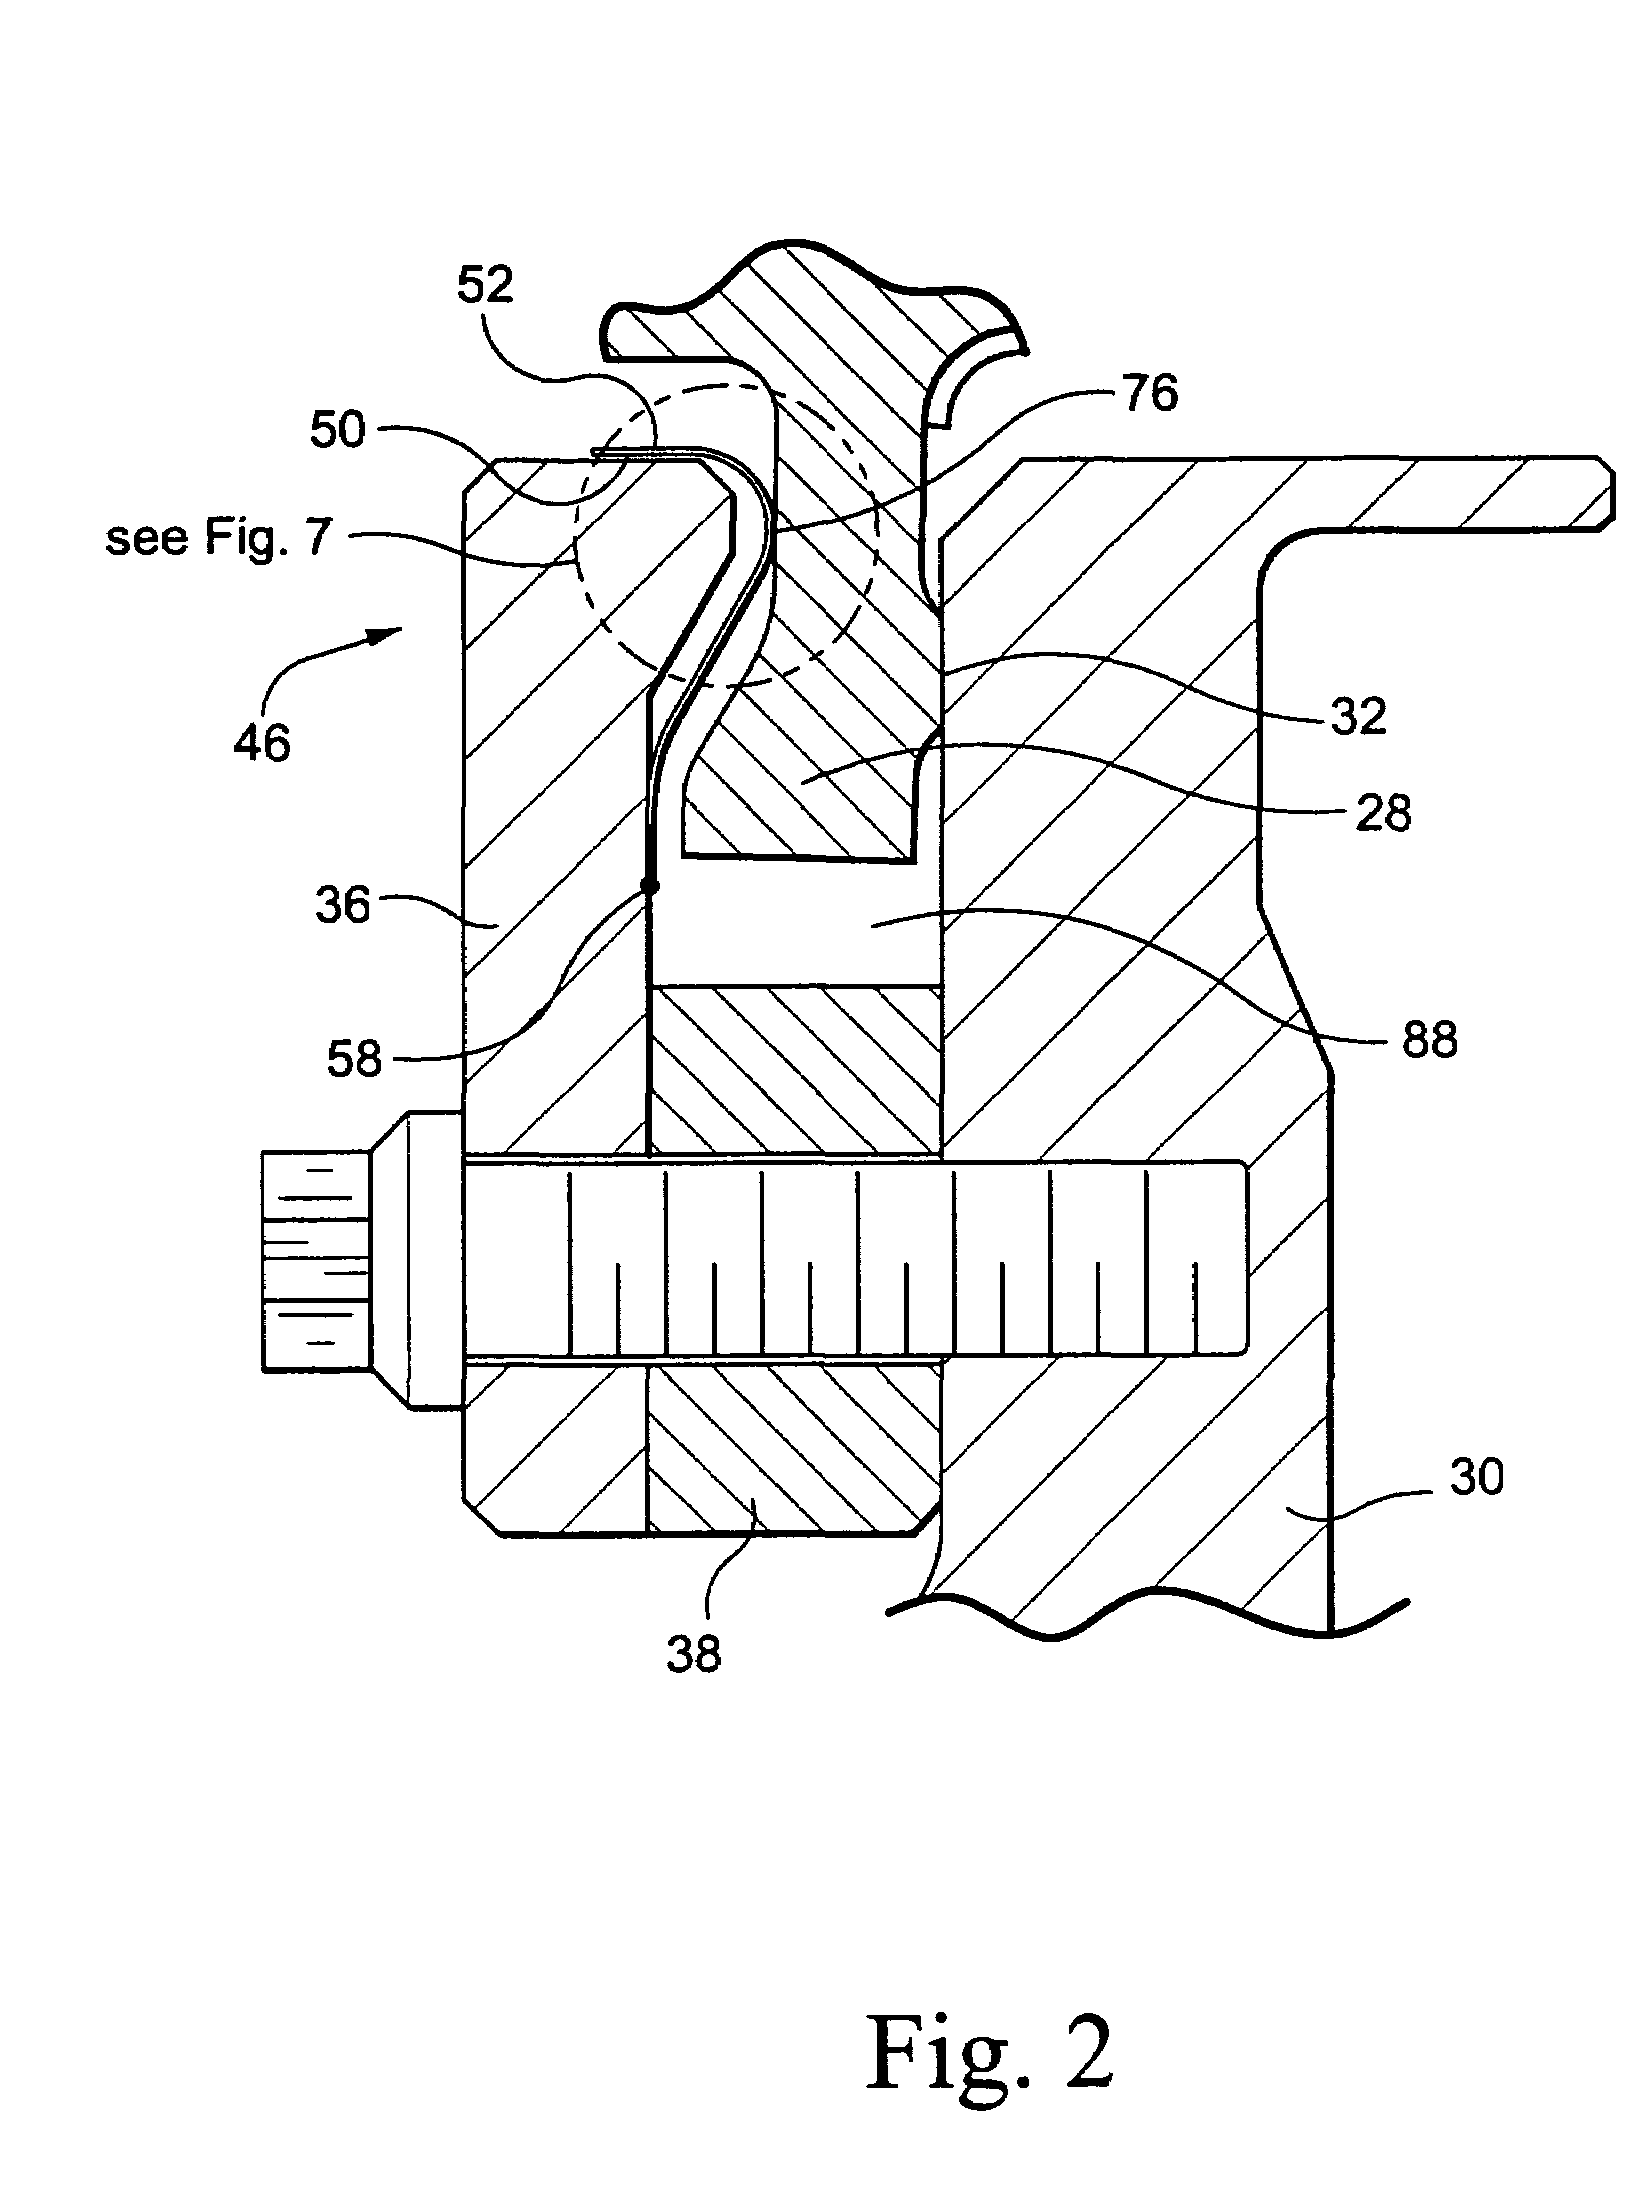 System for sealing an inner retainer segment and support ring in a gas turbine and methods therefor